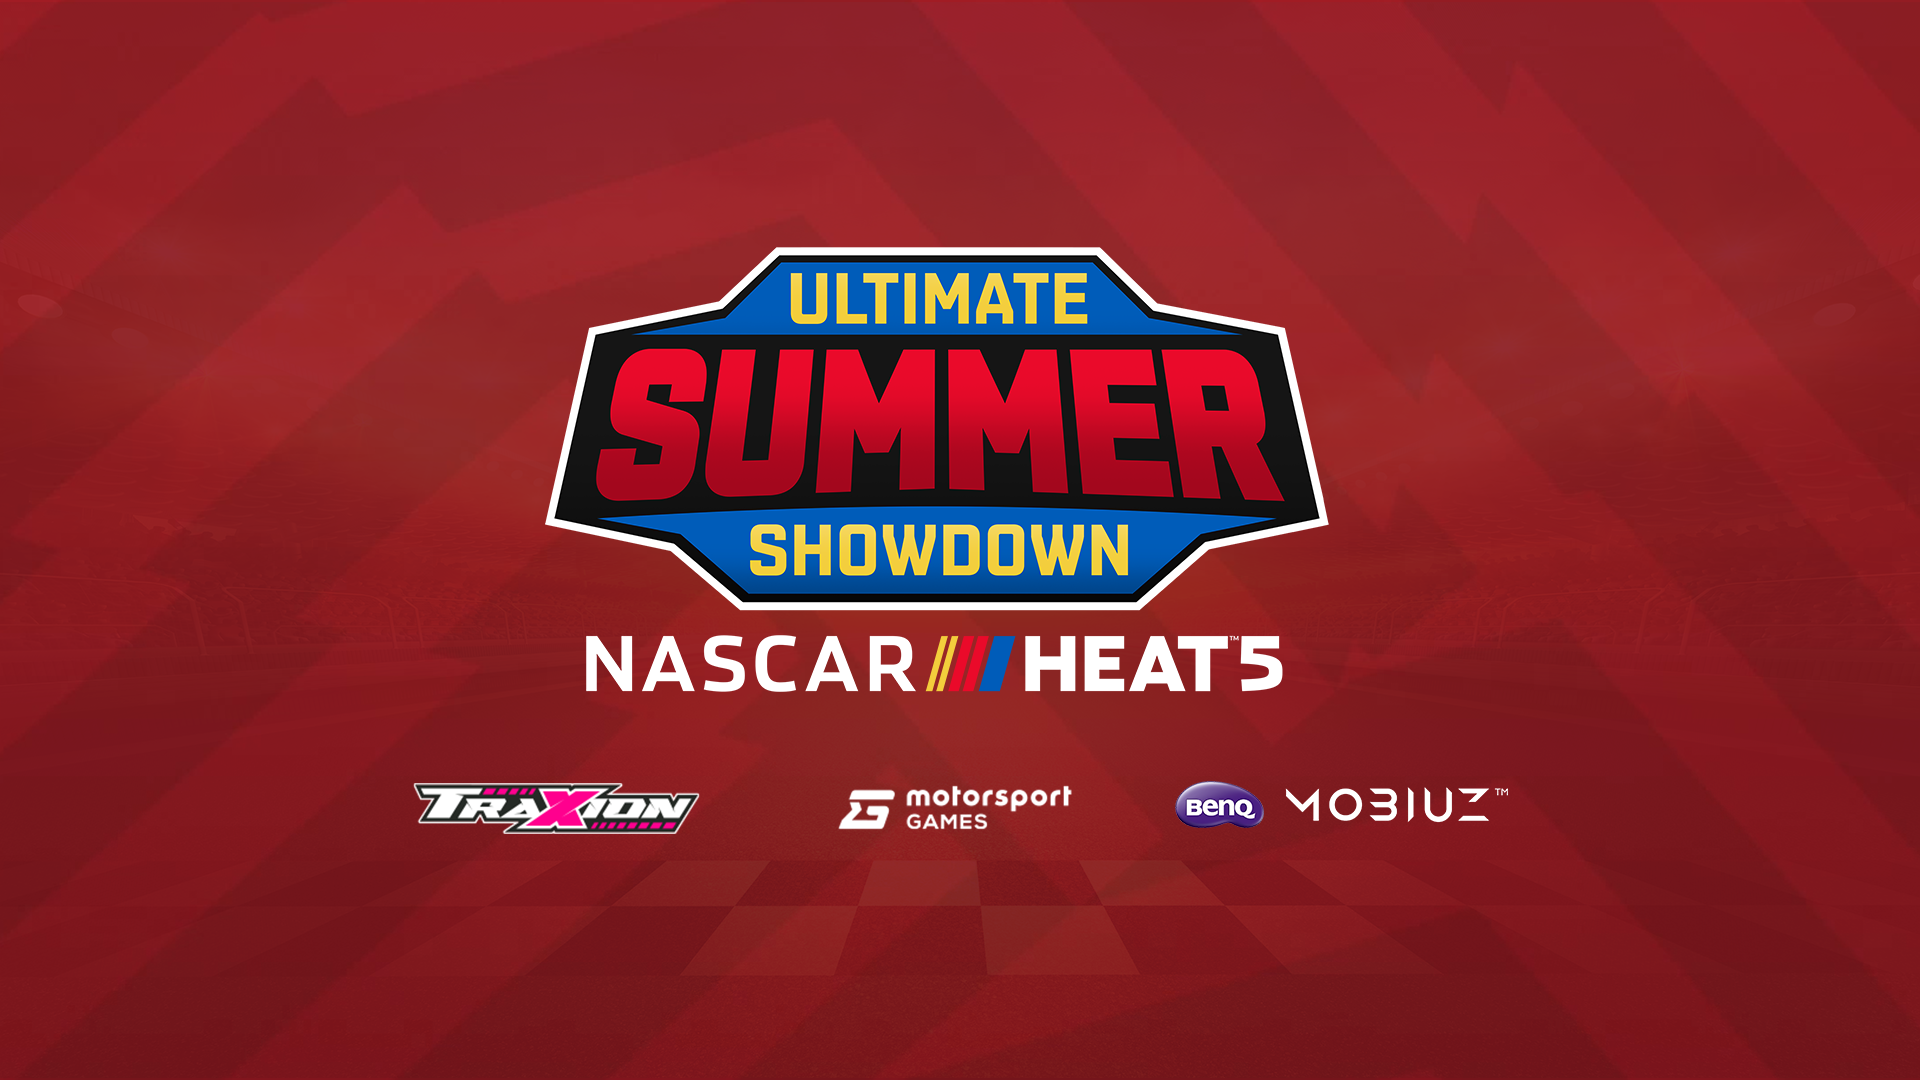 Ultimate Summer Showdown will bring the Heat from April to June